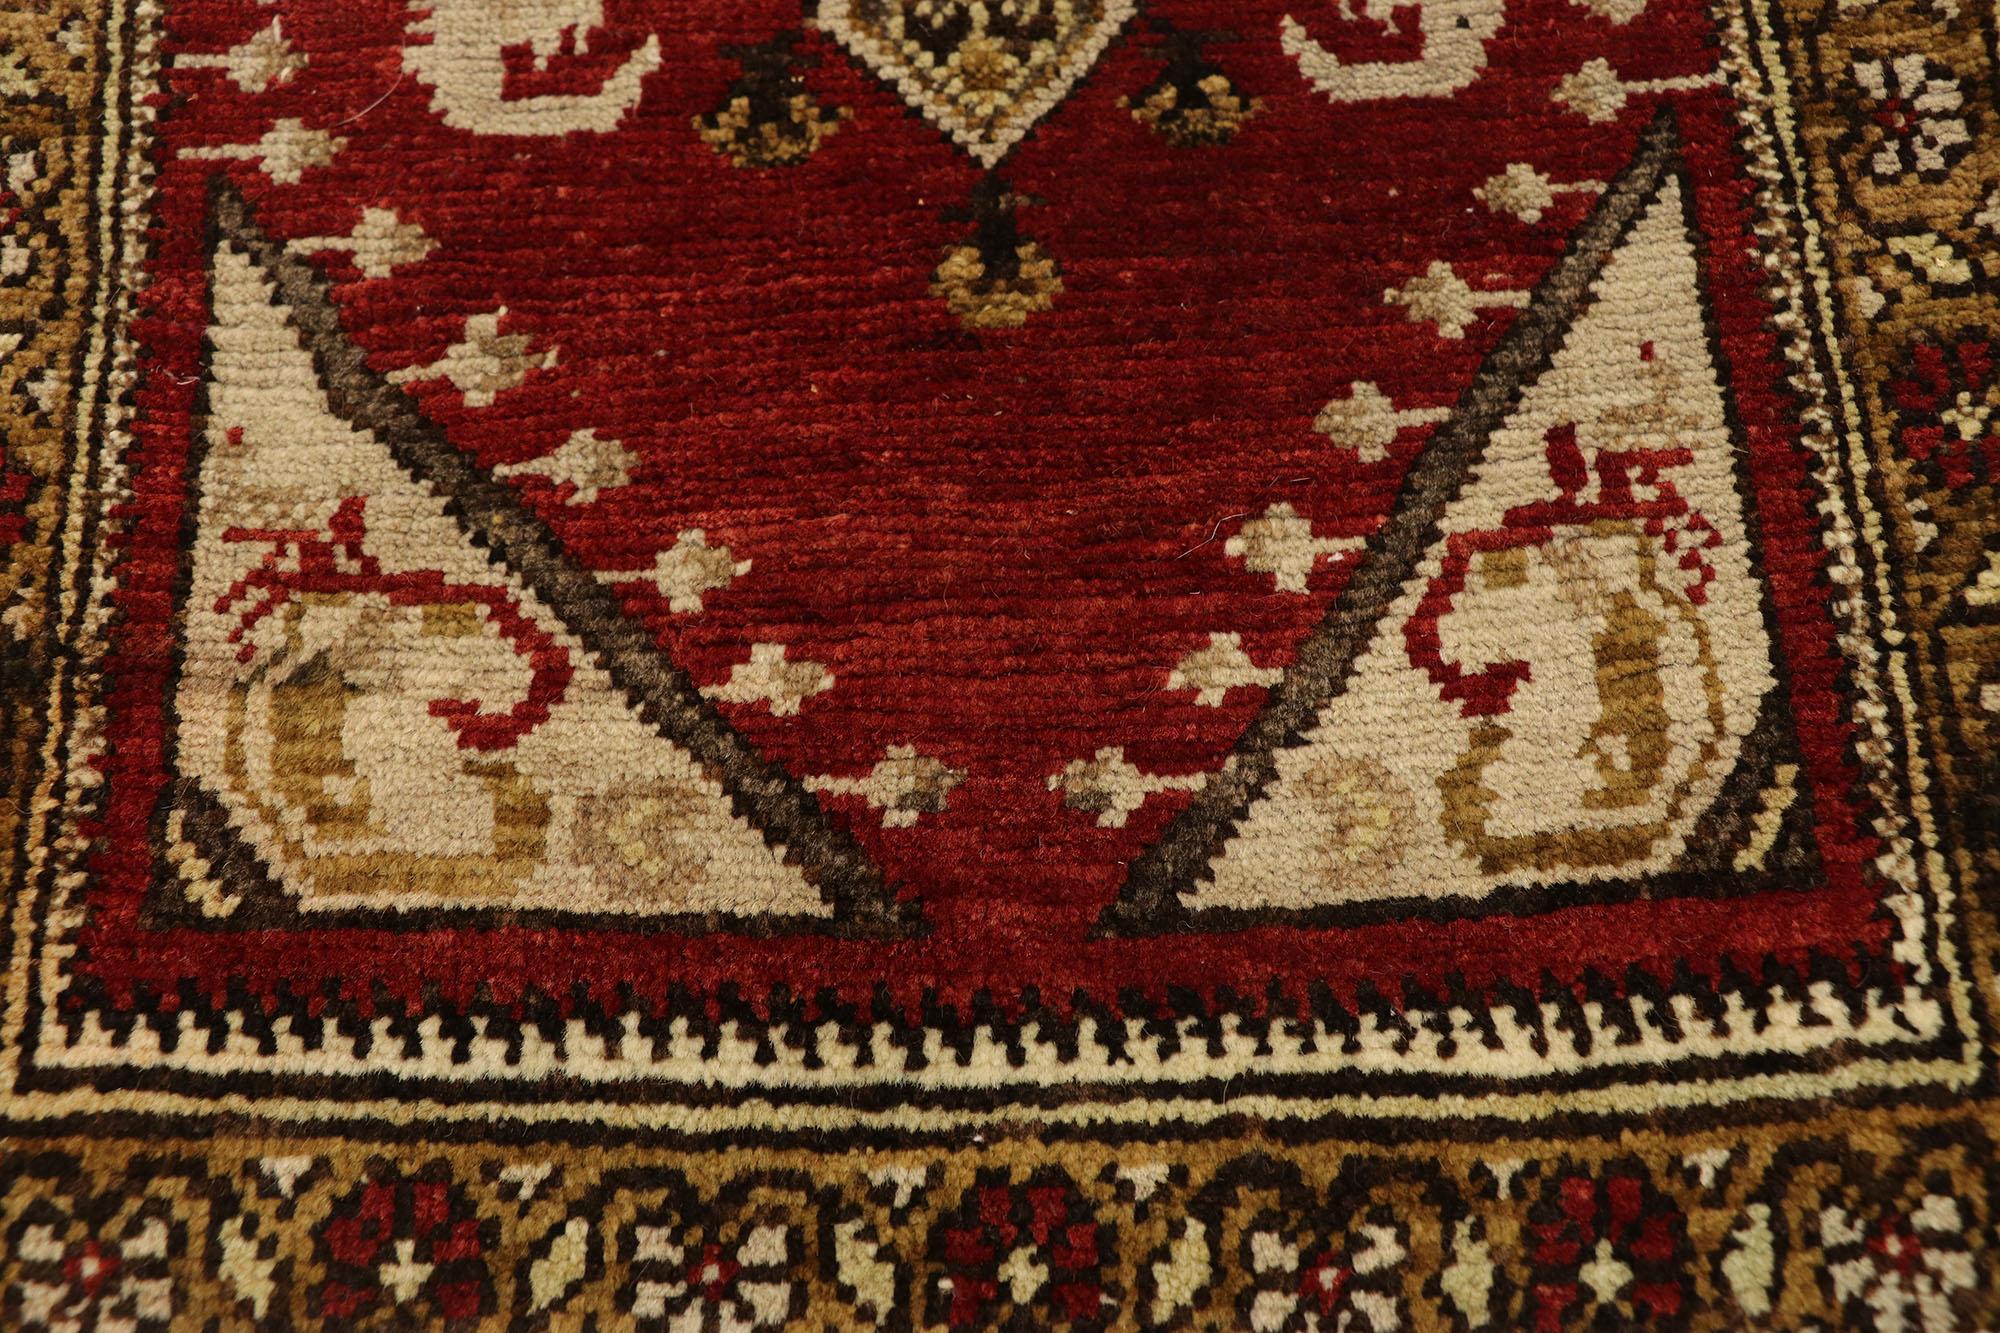 Vintage Turkish Yastik Oushak Carpet, Timeless Appeal Meets Stylish Durability In Good Condition For Sale In Dallas, TX